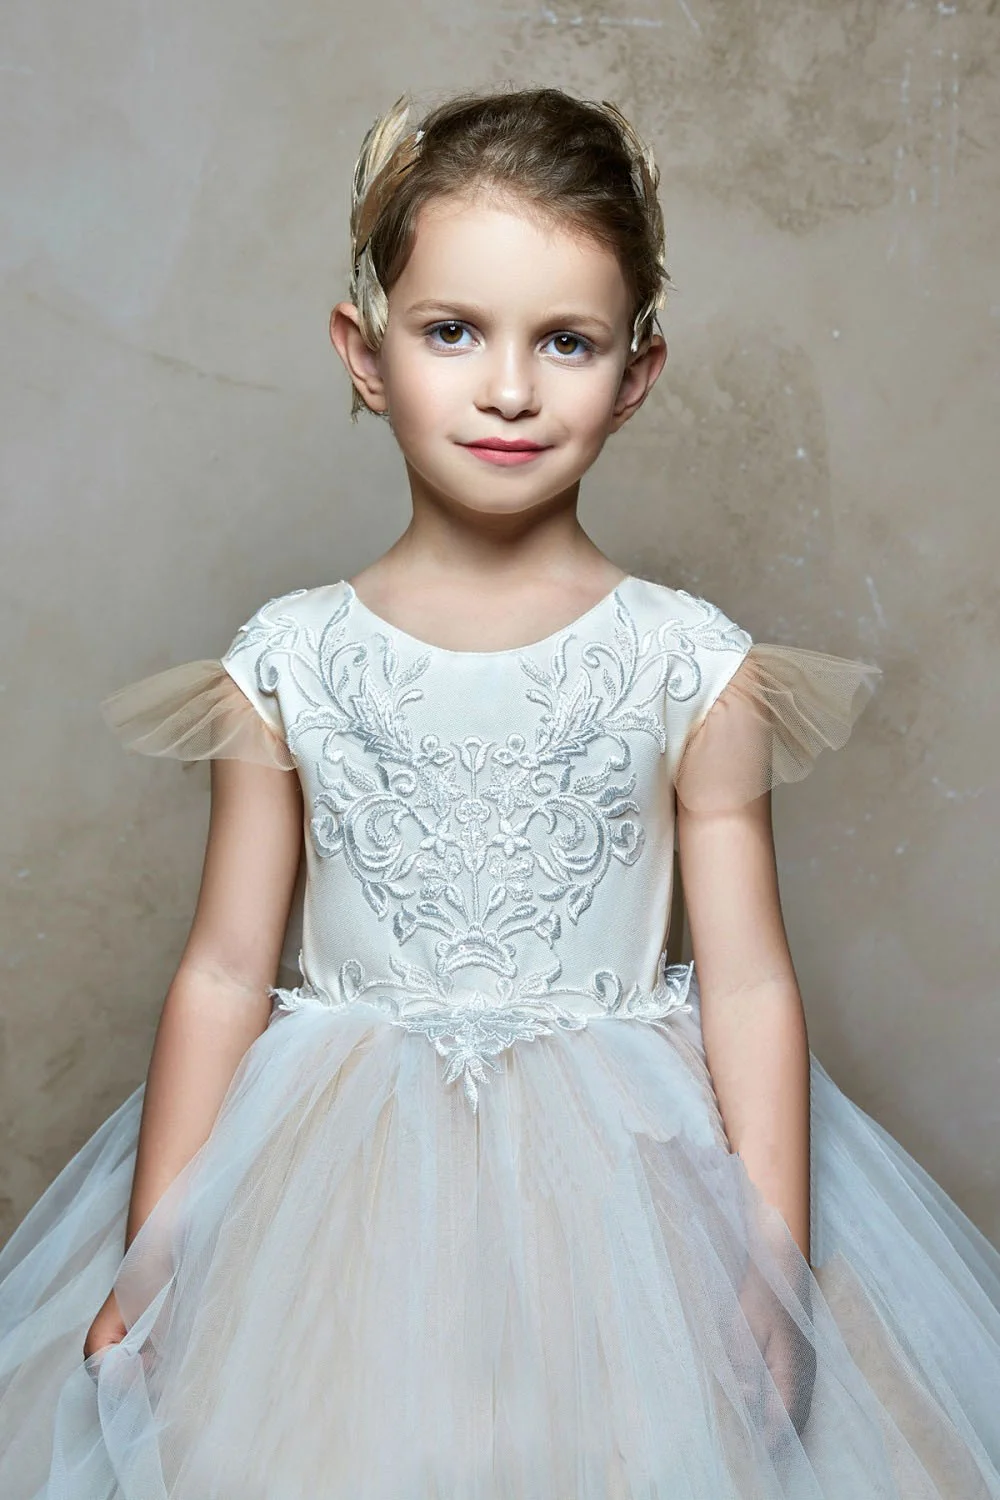 MisShow Flower Girl Dresses Long Train Floor Length Princess Ball Gown Sleeveless Button Appqulies Tulle Beads With Bow TUTU images - 6